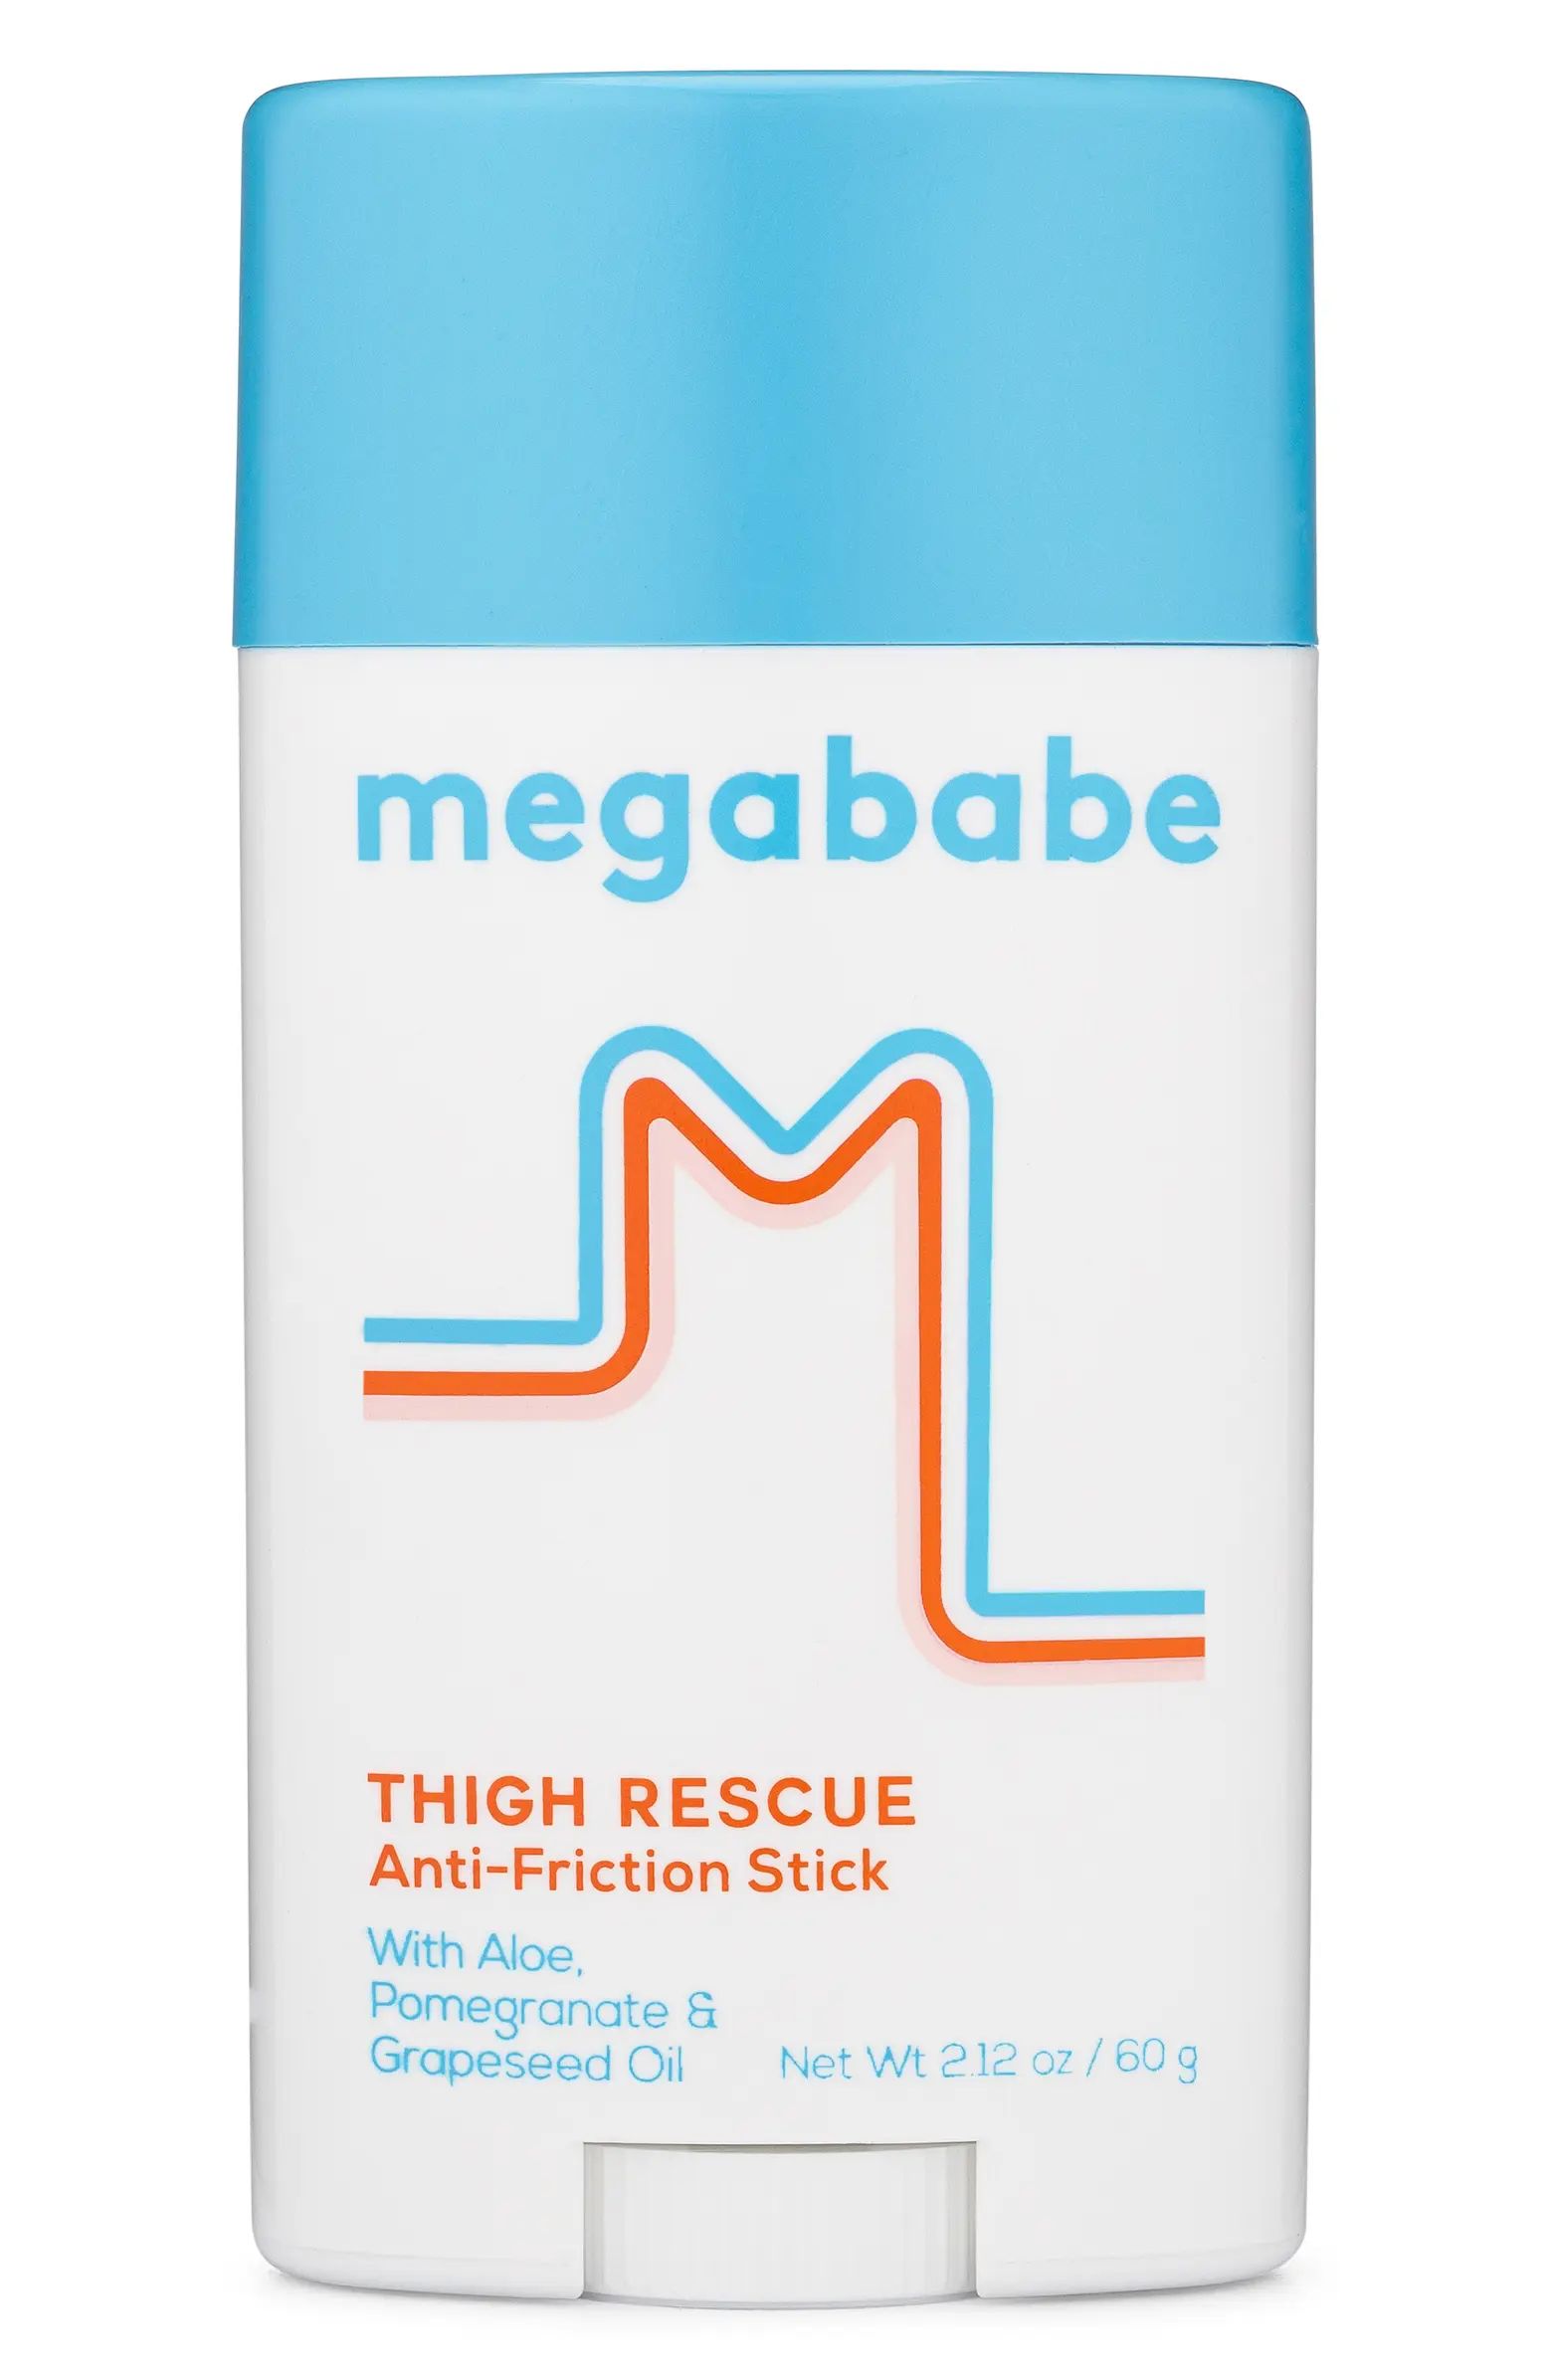 Megababe Thigh Rescue Anti Friction Stick | Nordstrom | Nordstrom